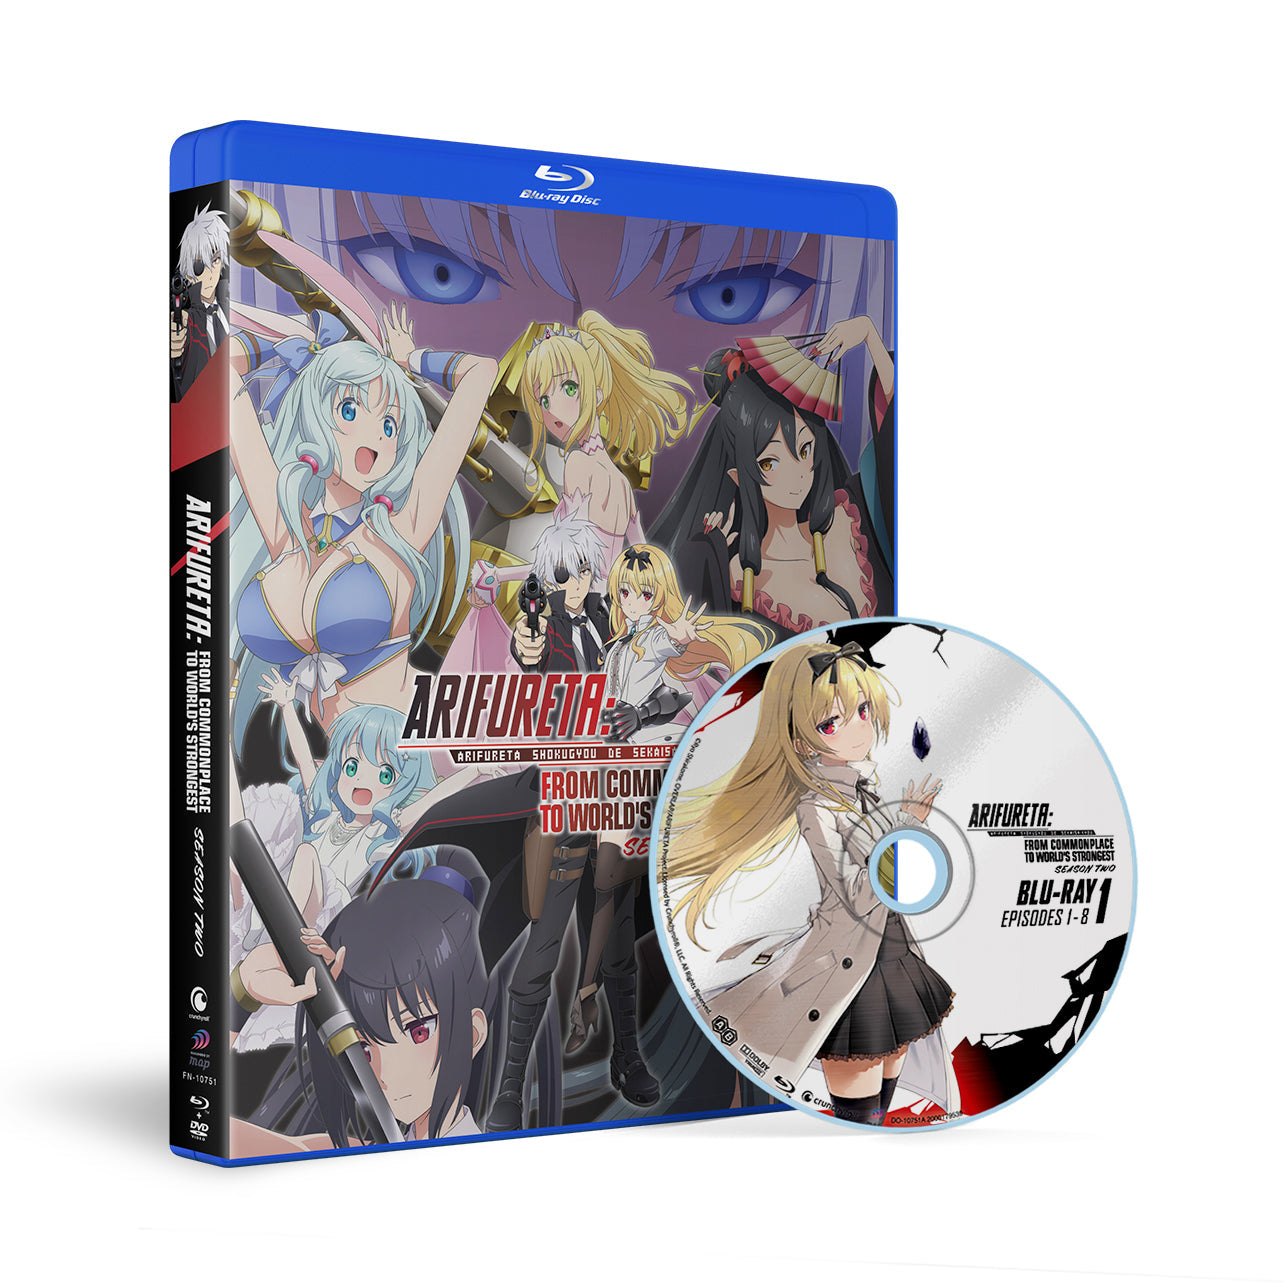 Arifureta: From Commonplace to World's Strongest - Season 2 - BD/DVD - LE image count 11